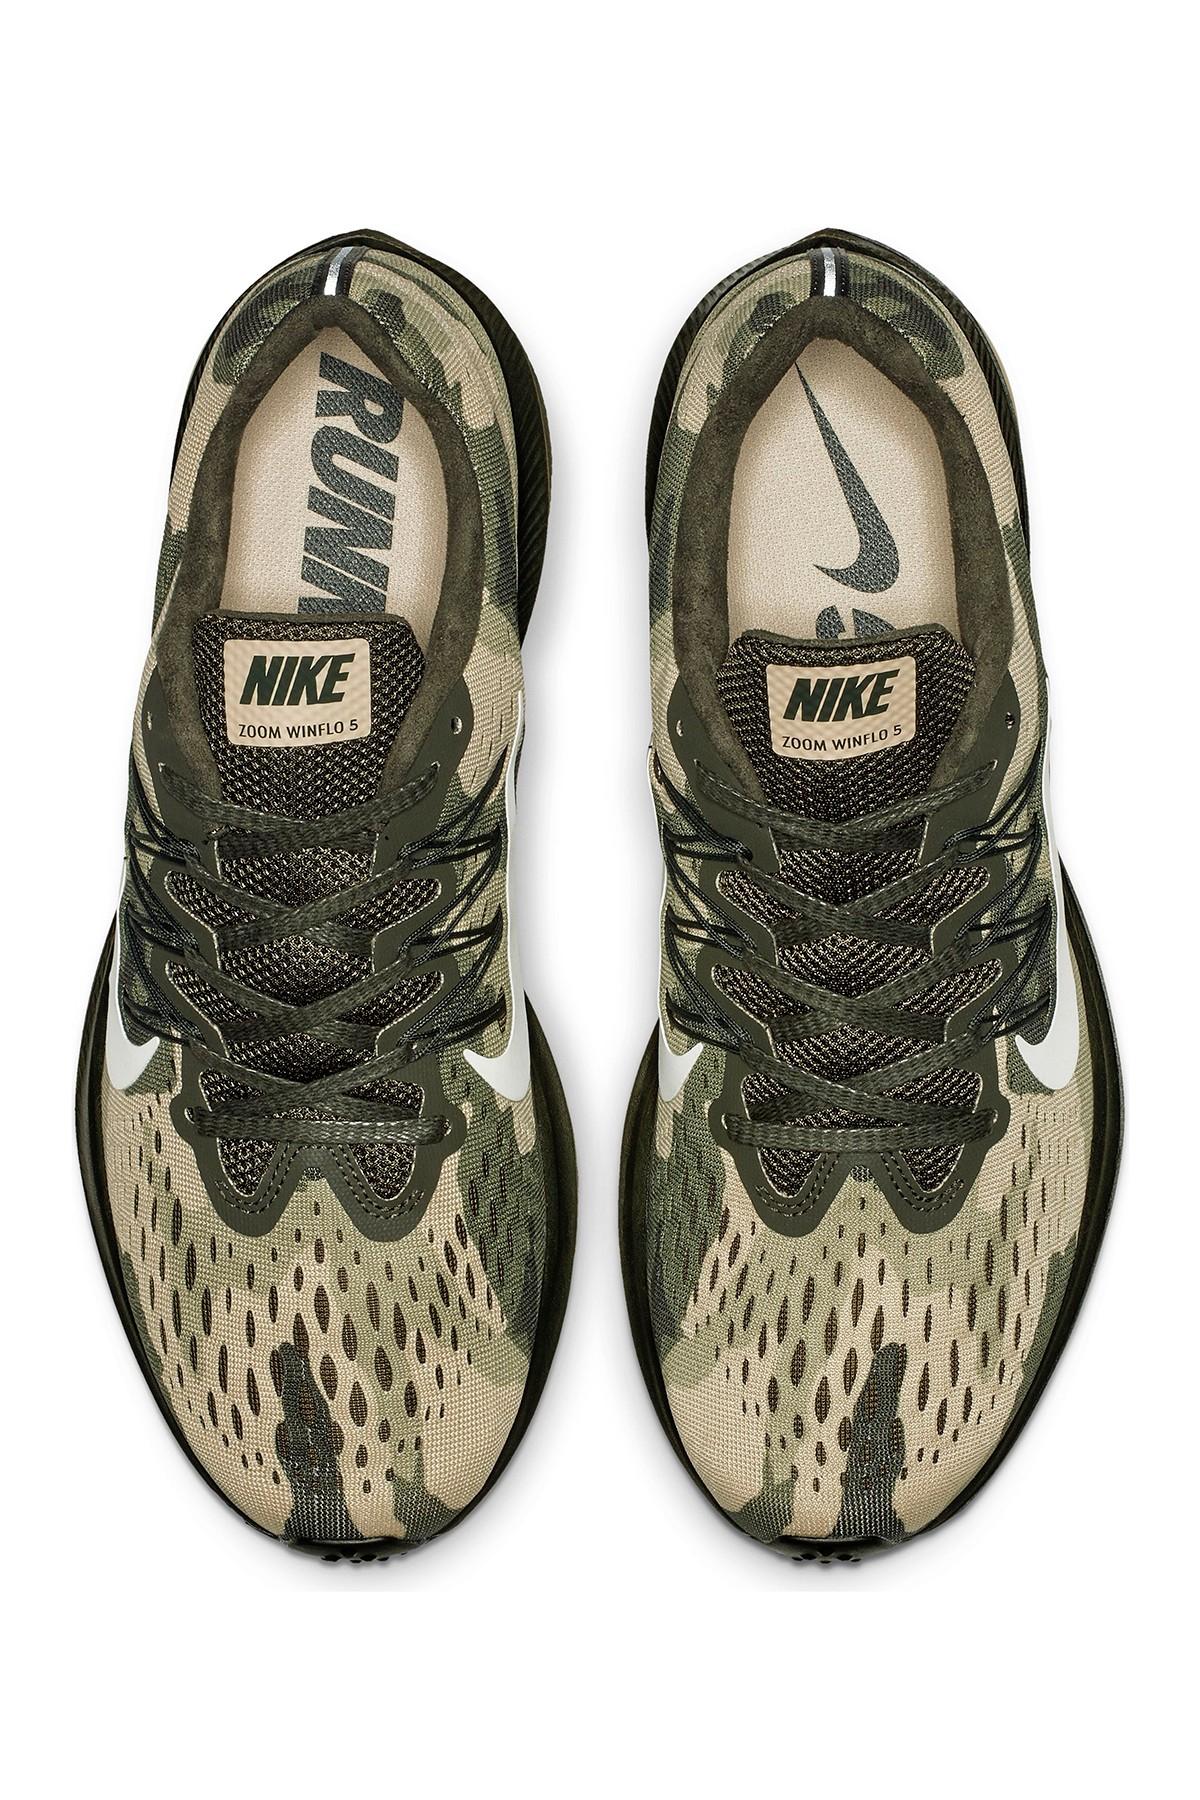 Nike Lace Air Zoom Winflo 5 Camo Running Shoe in Green for